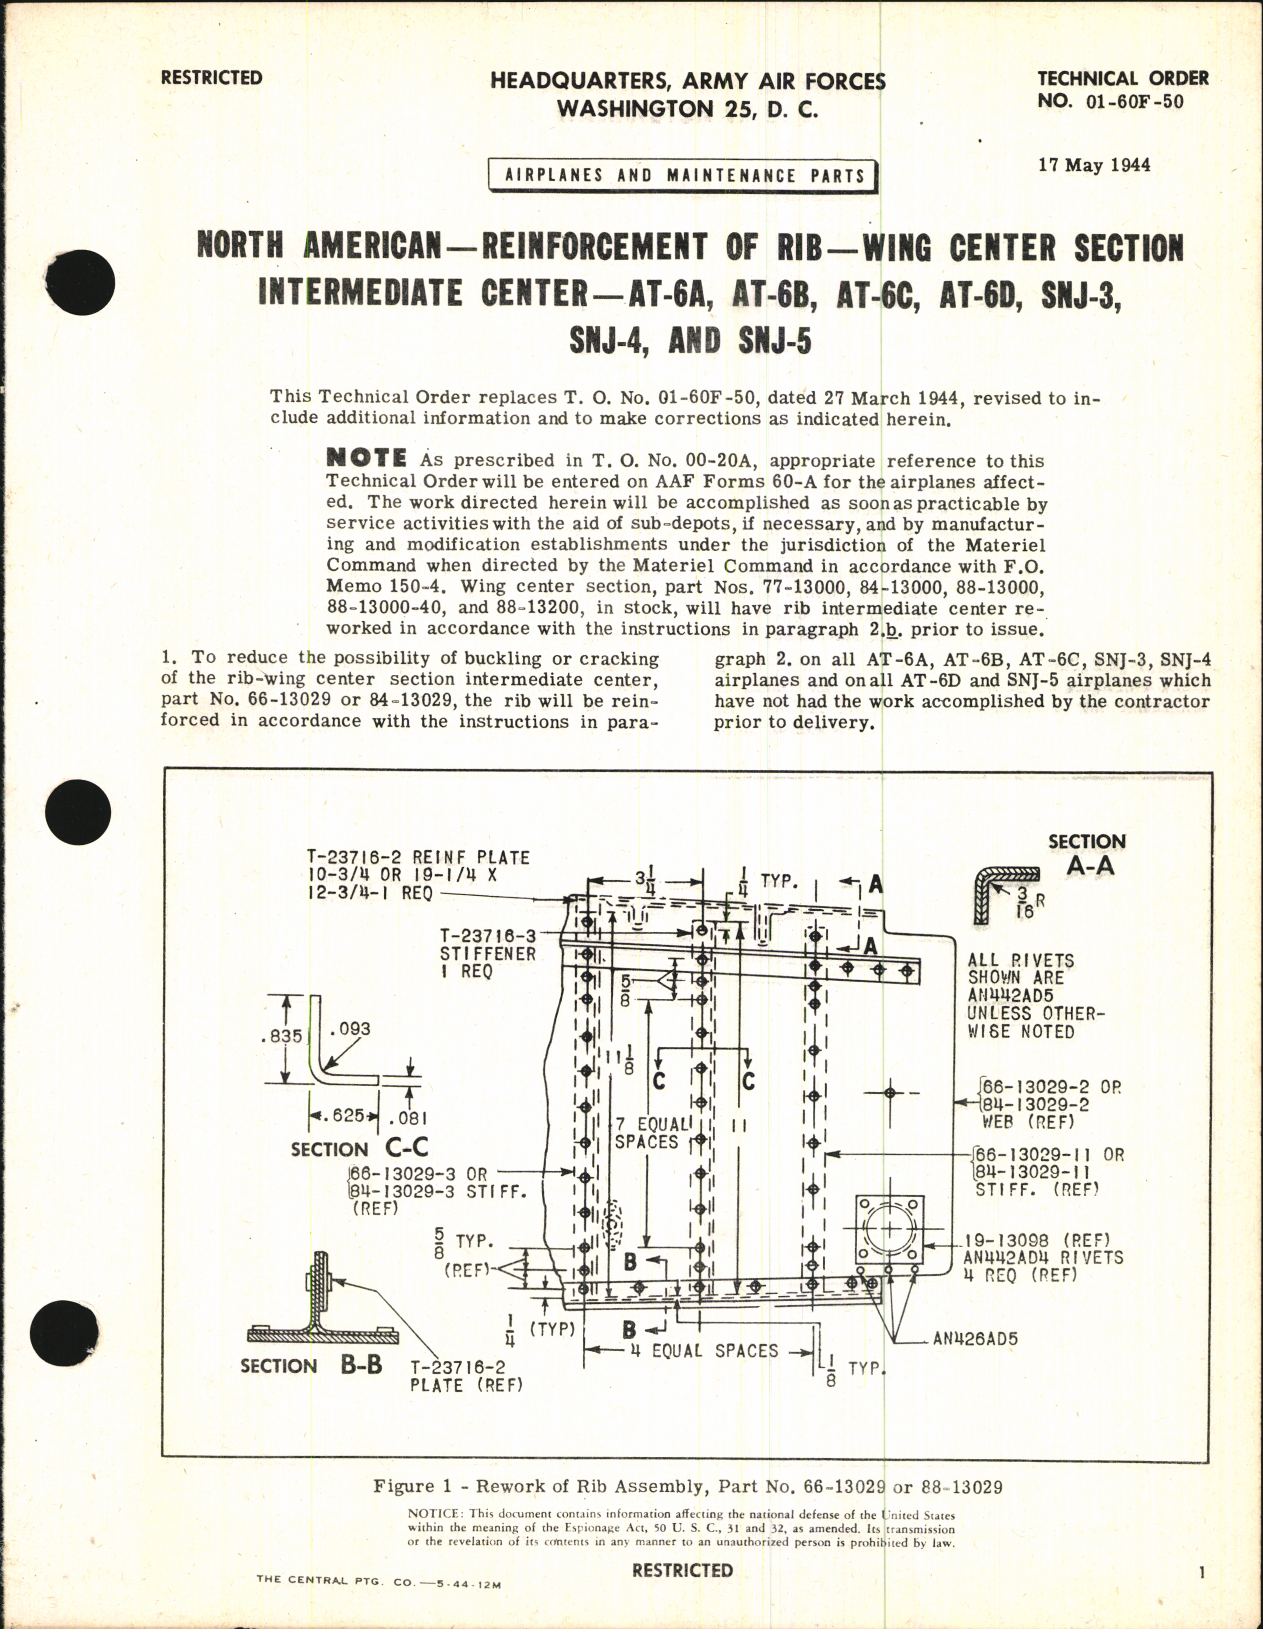 Sample page 1 from AirCorps Library document: Reinforcement of Rib - Wing Center Section Intermediate Center for AT-6A, B, C, D, SNJ-3, -4, and -5